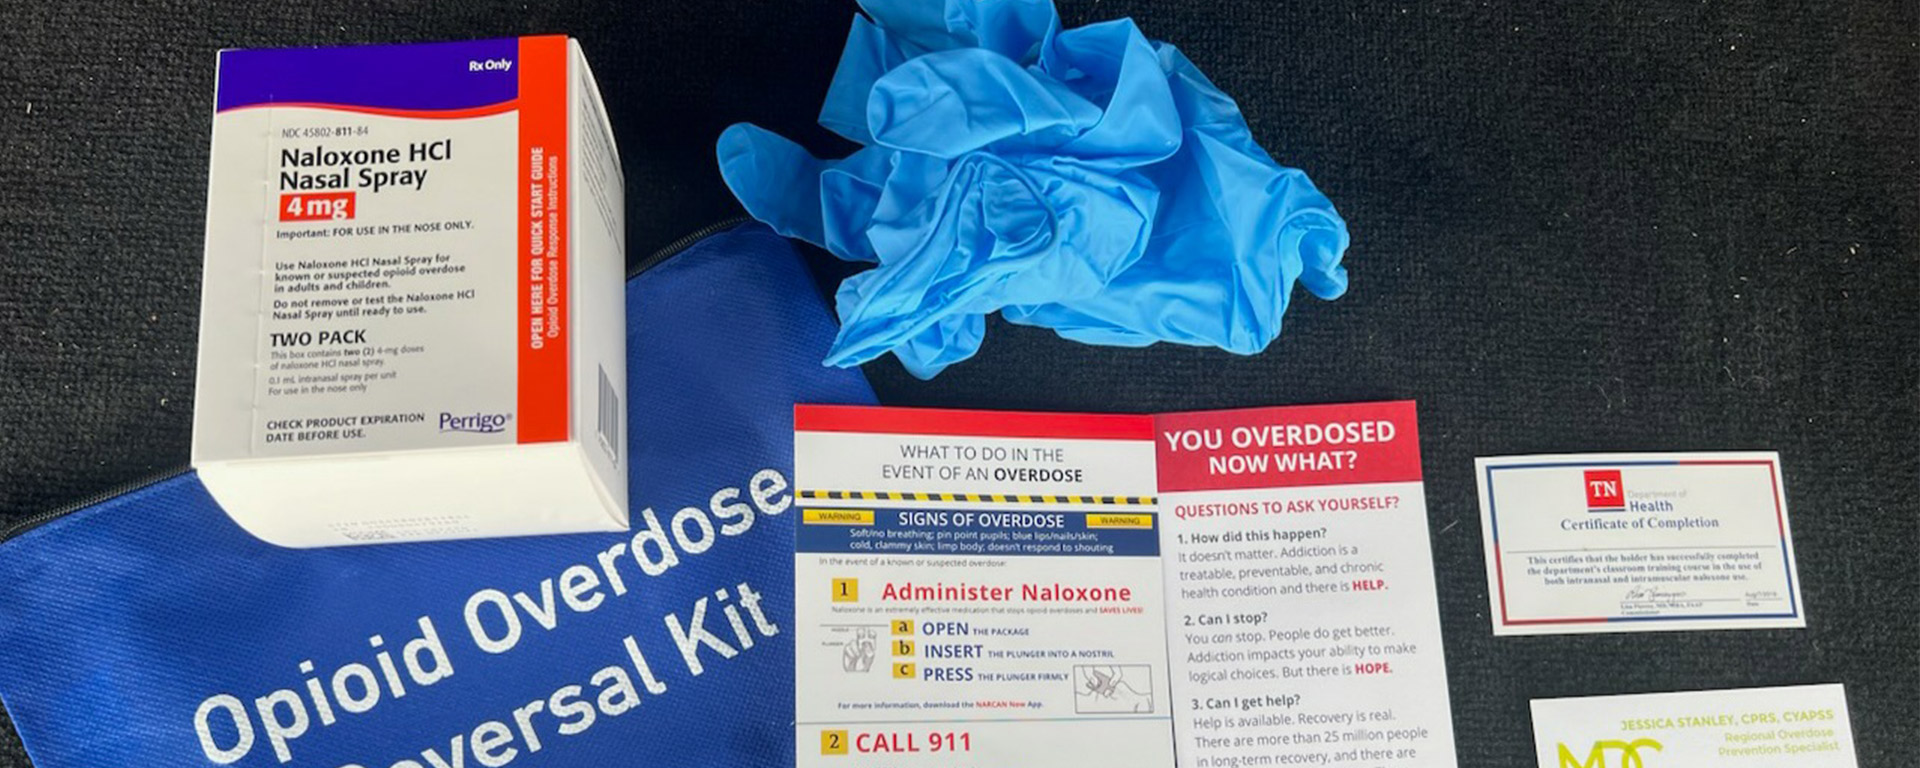 Narcan kit with all its contents.